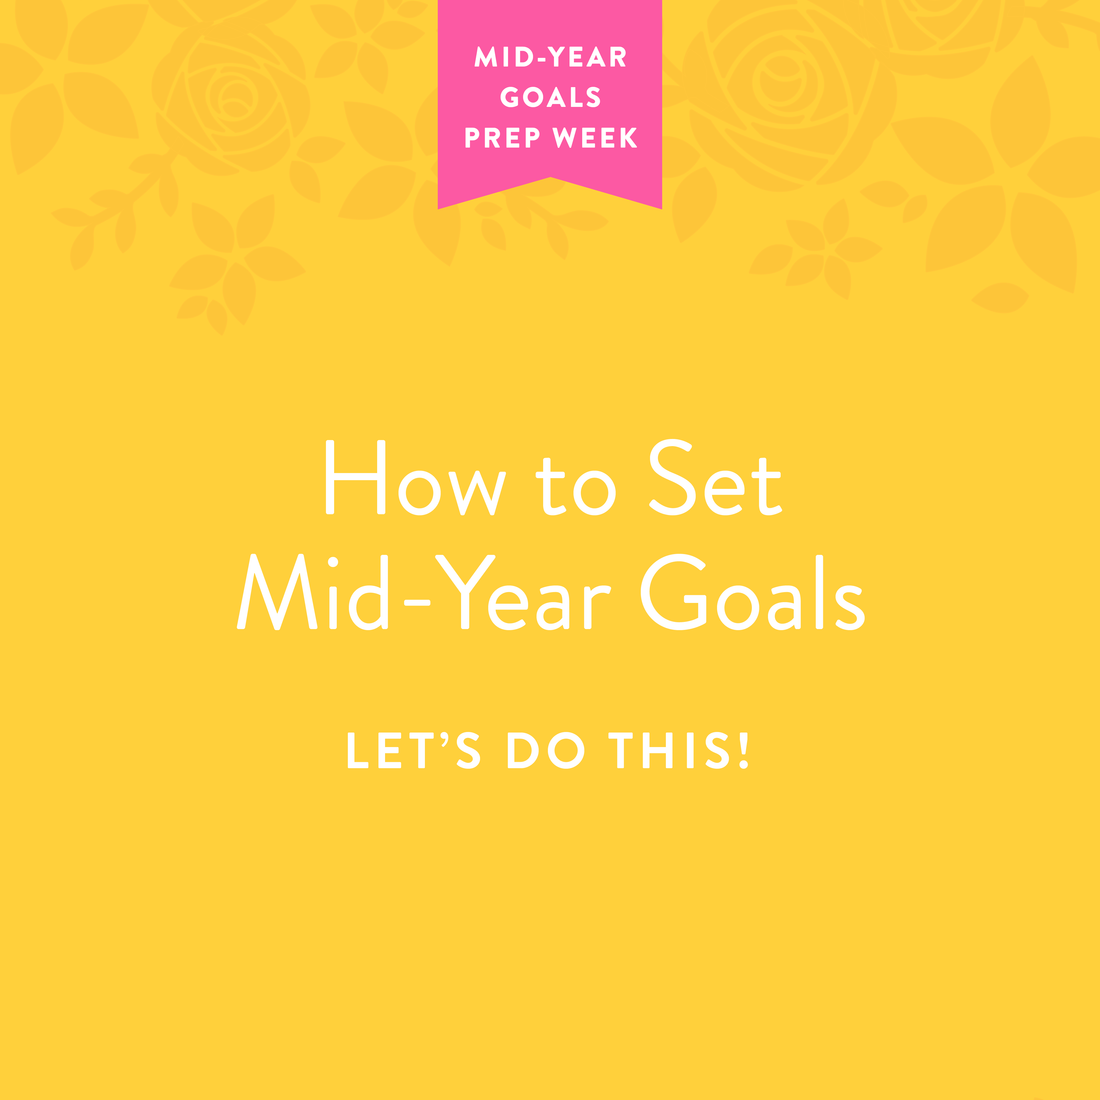 How to Set Mid-Year Goals